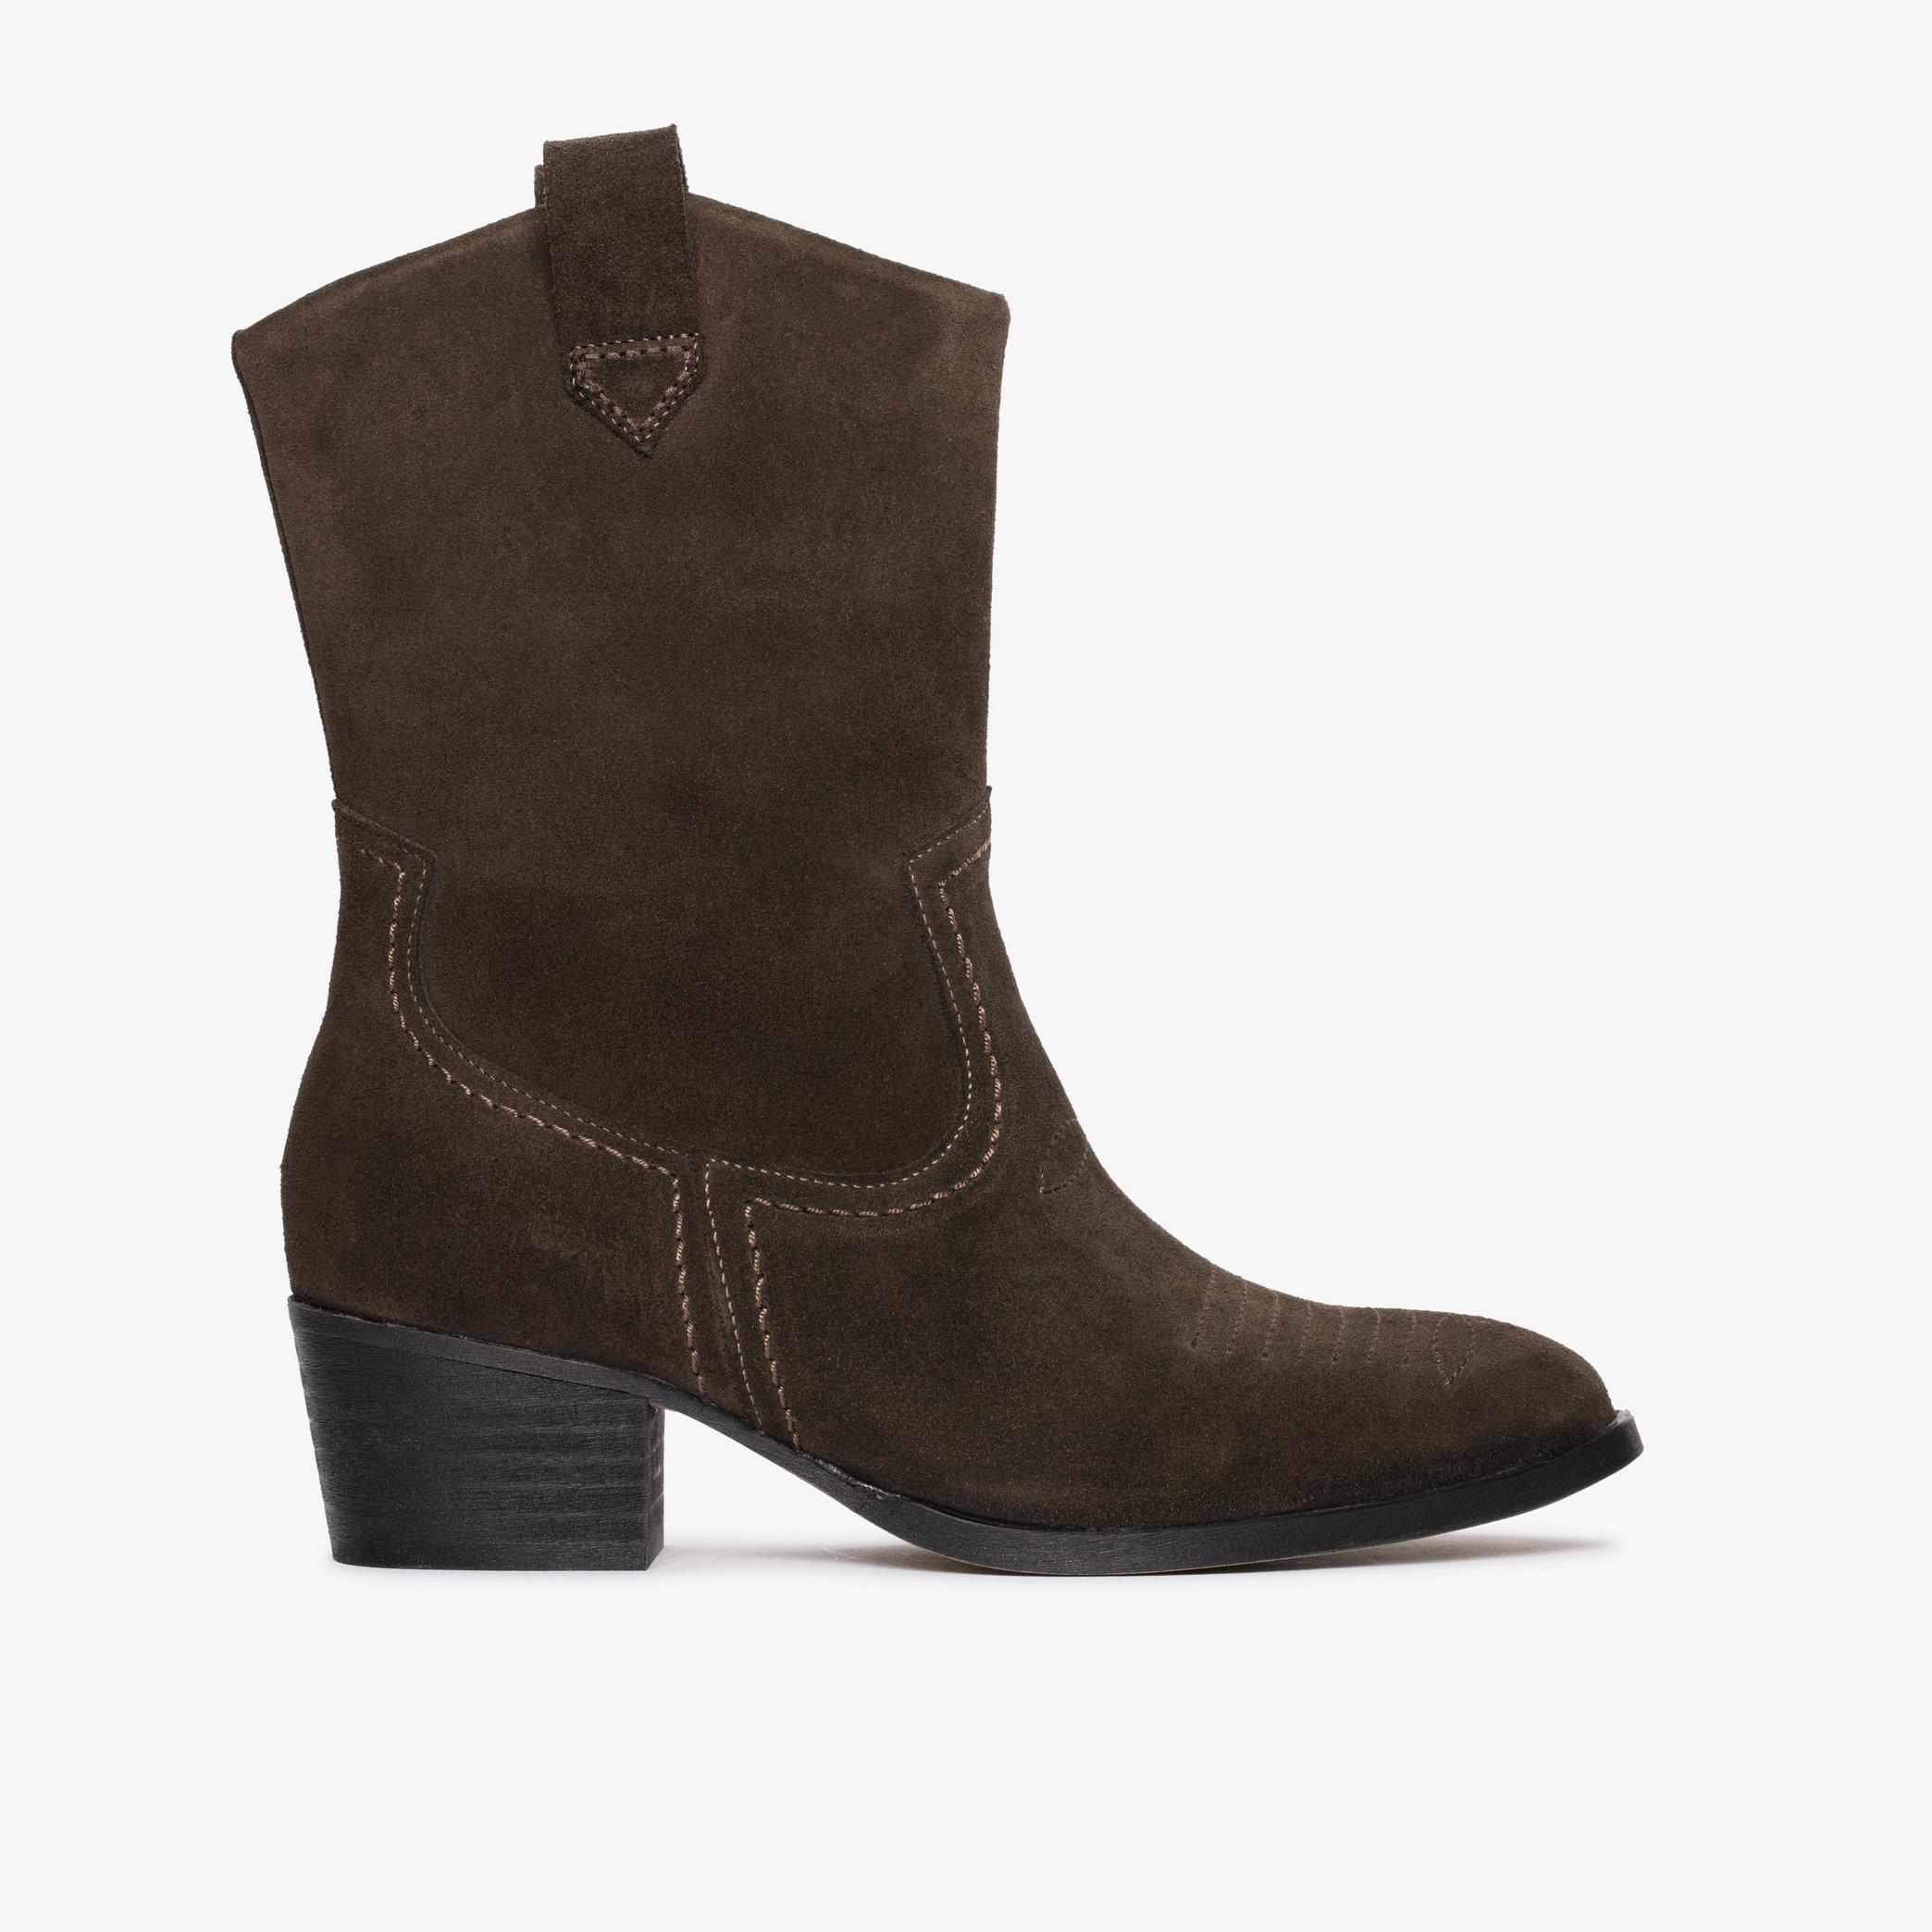 Octavia Up Dark Brown Suede Mid Calf Boots, view 1 of 6